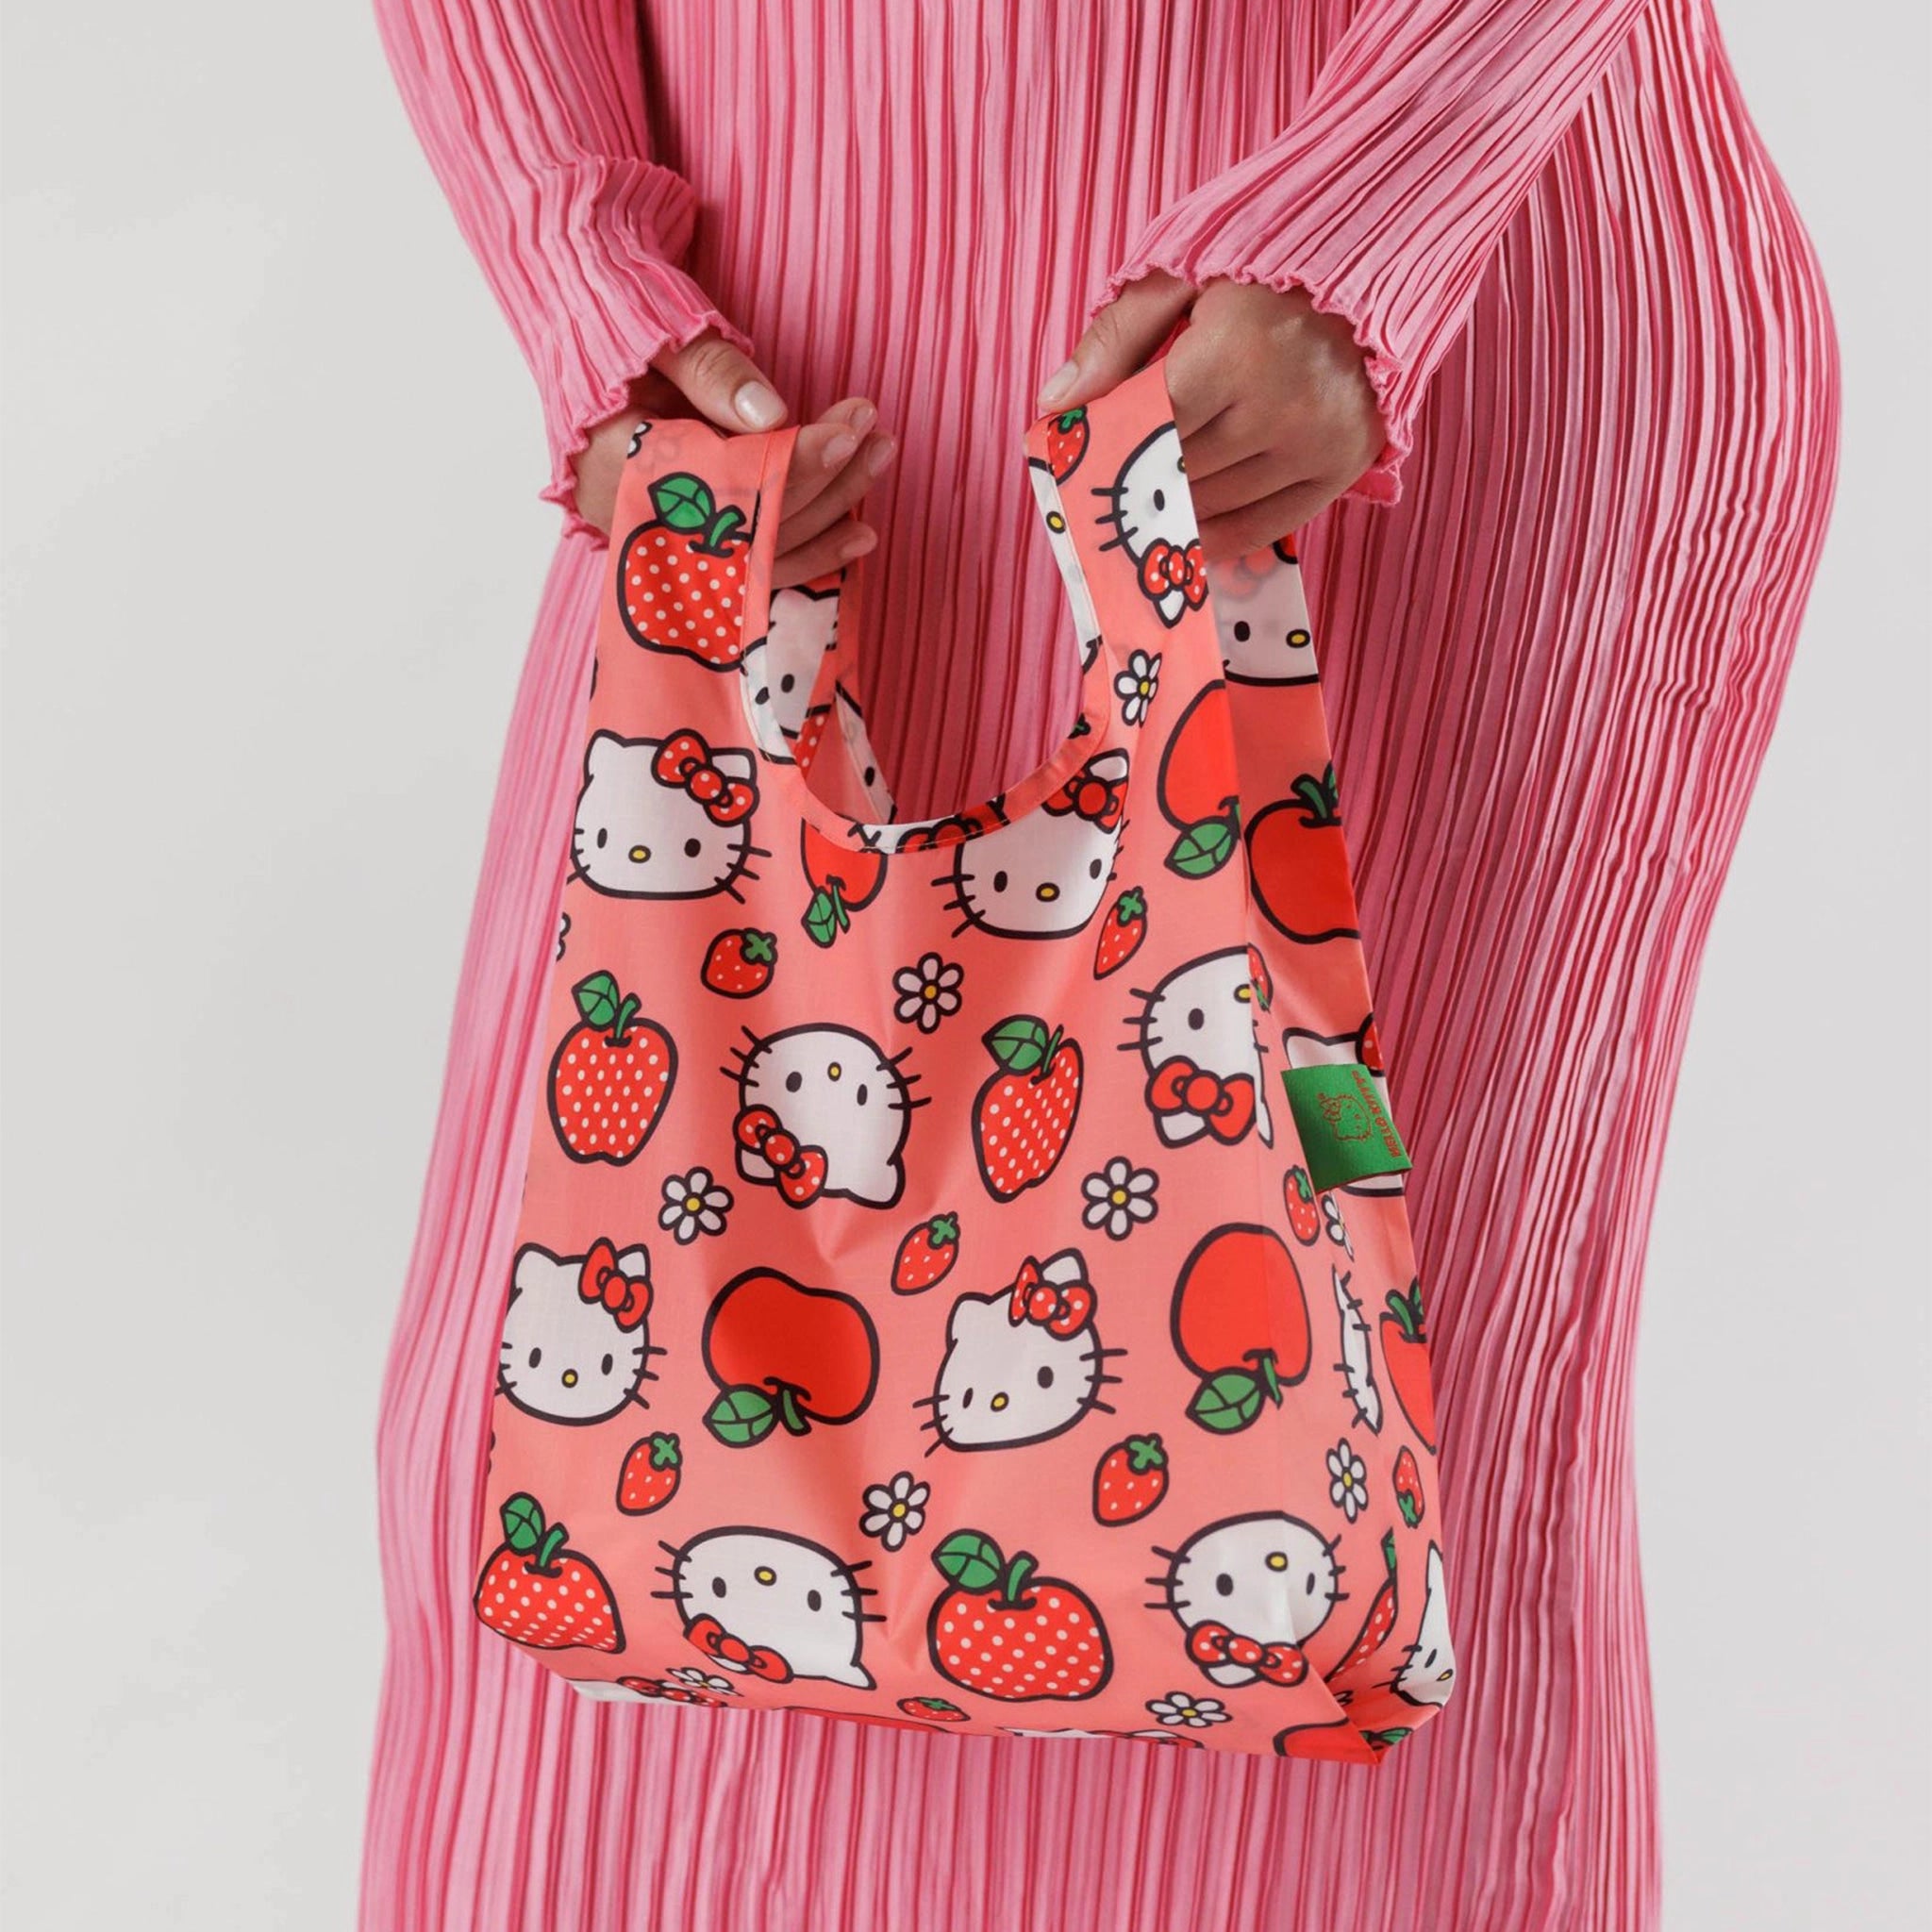 On a white background a model is holding a hello kitty and apple printed nylon tote bag.